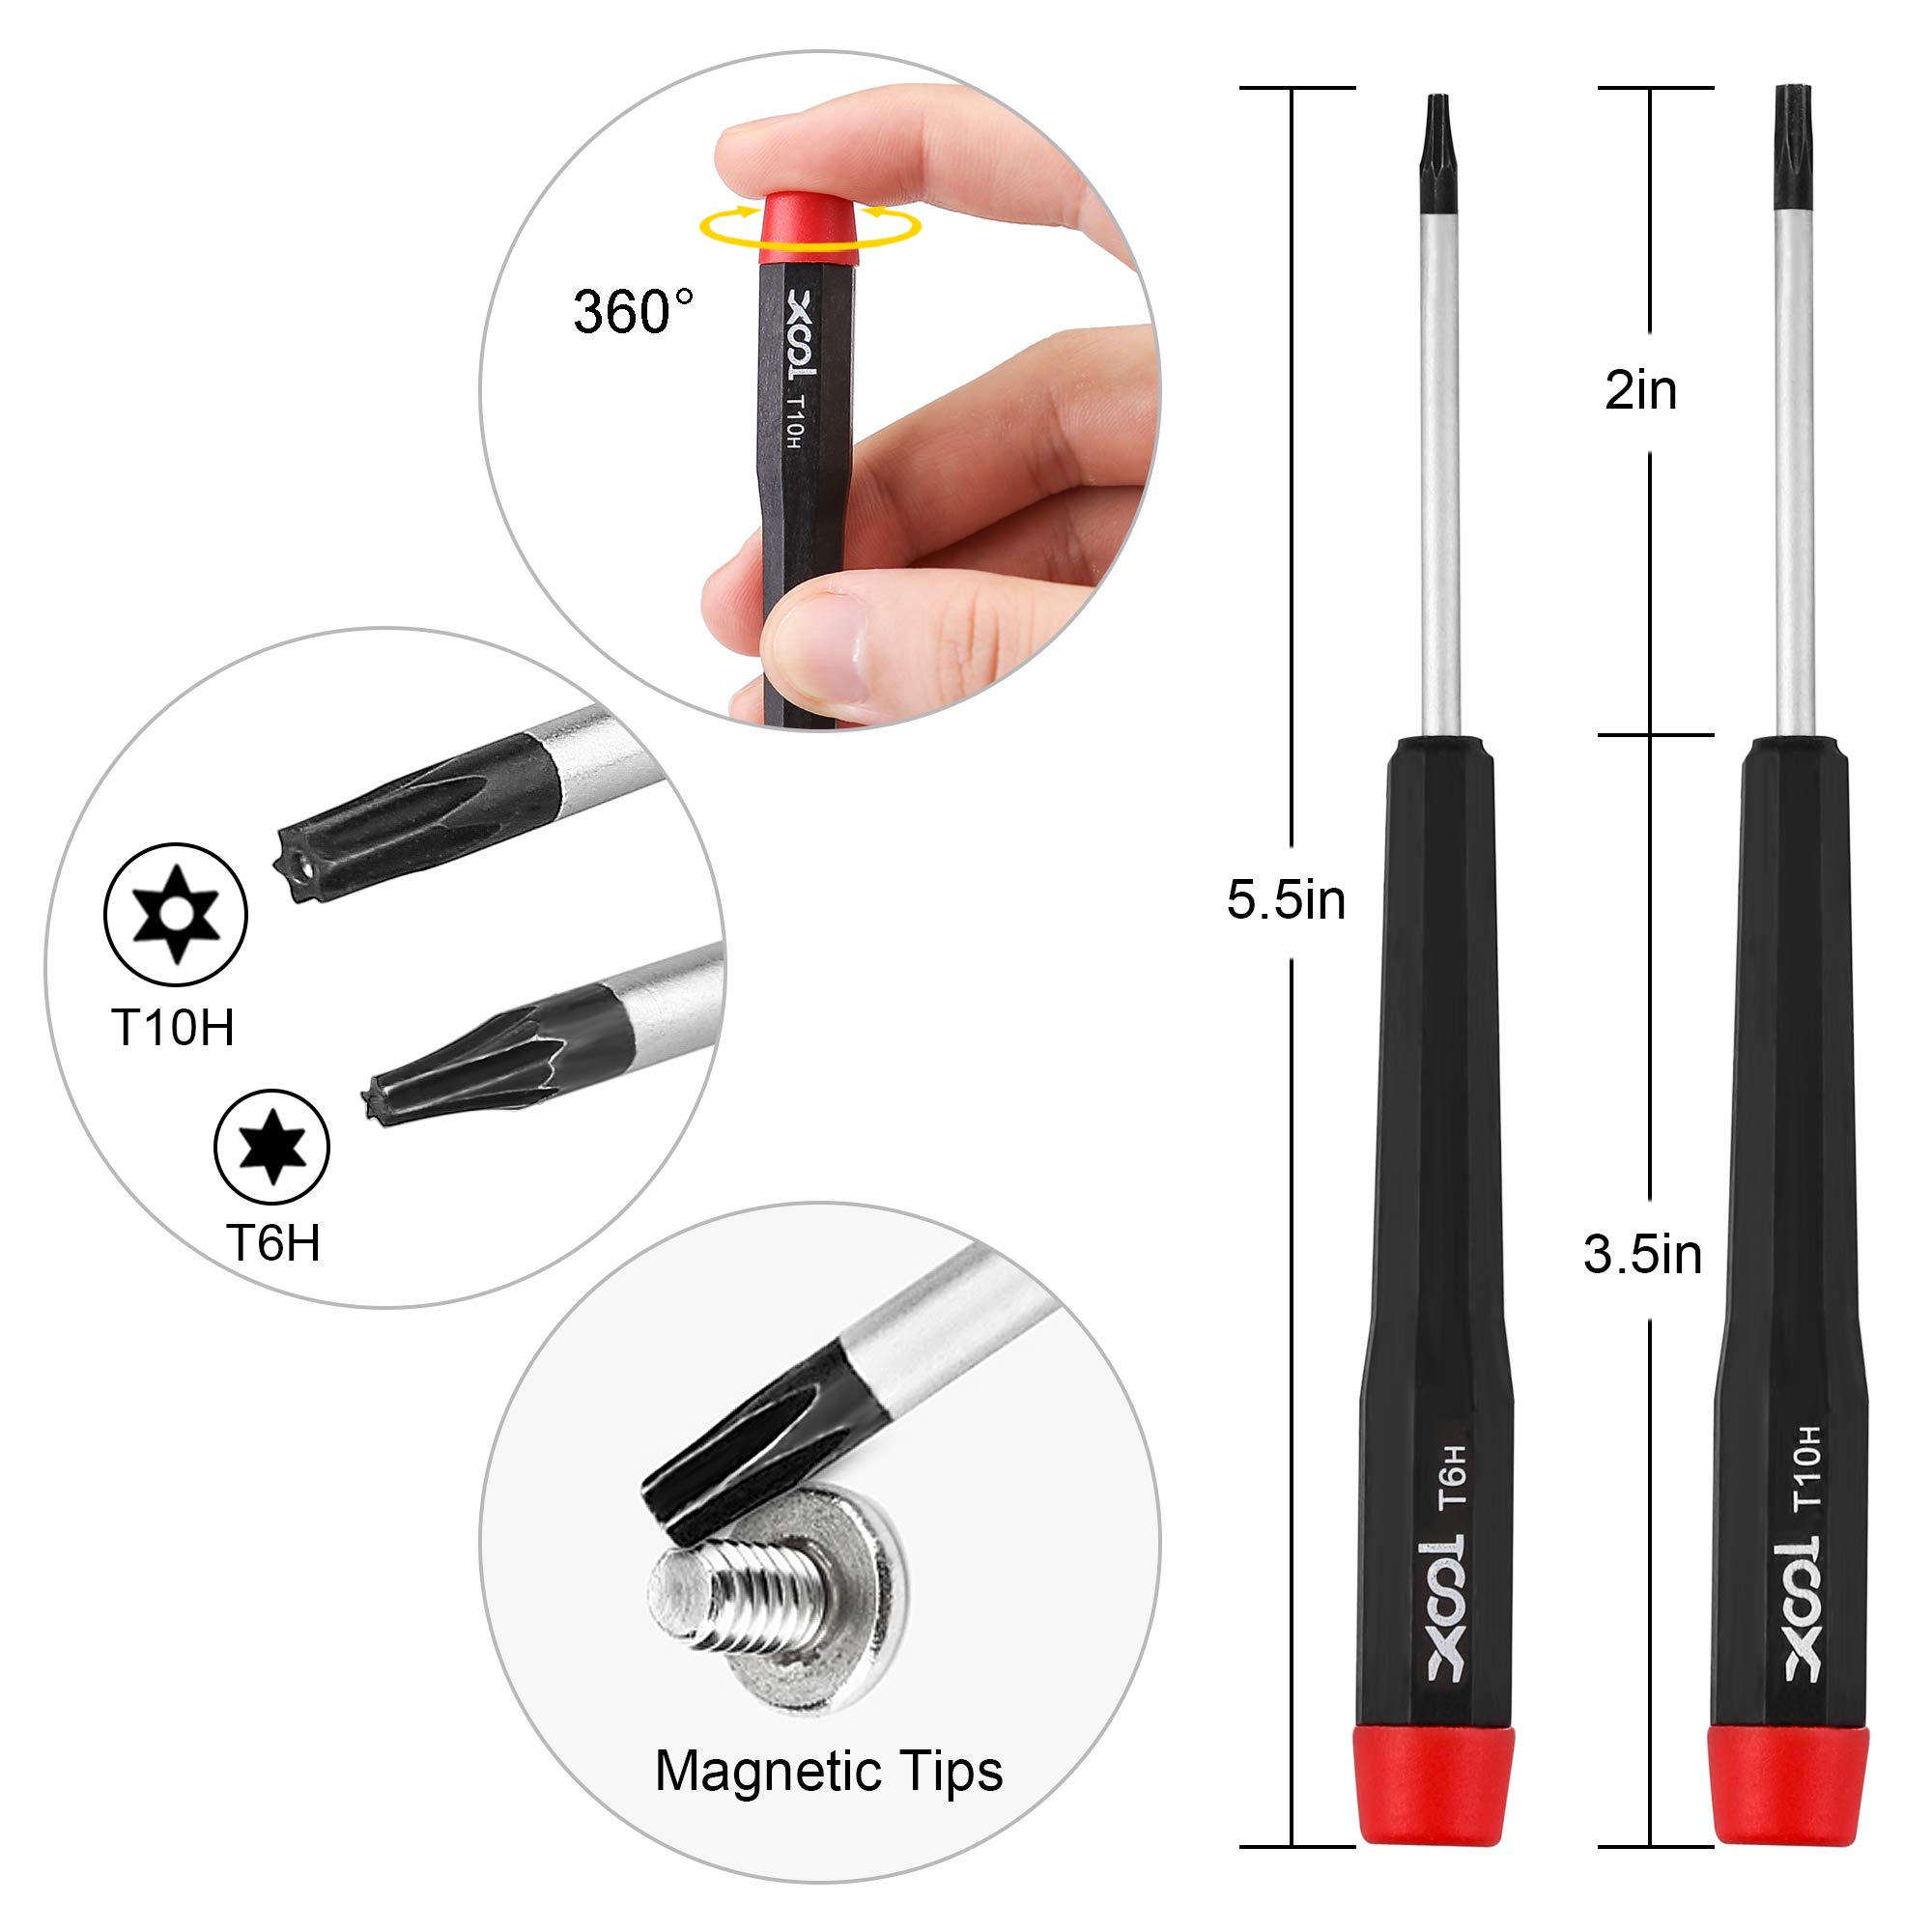 XOOL Tri Tip Screwdriver, 17 in 1 Professional Screwdriver Game Bit Repair Tools Kit for Switch JoyCon PS3 PS4 PS5 Xbox One 360 Gamebit NES SNES DS Wii GBA